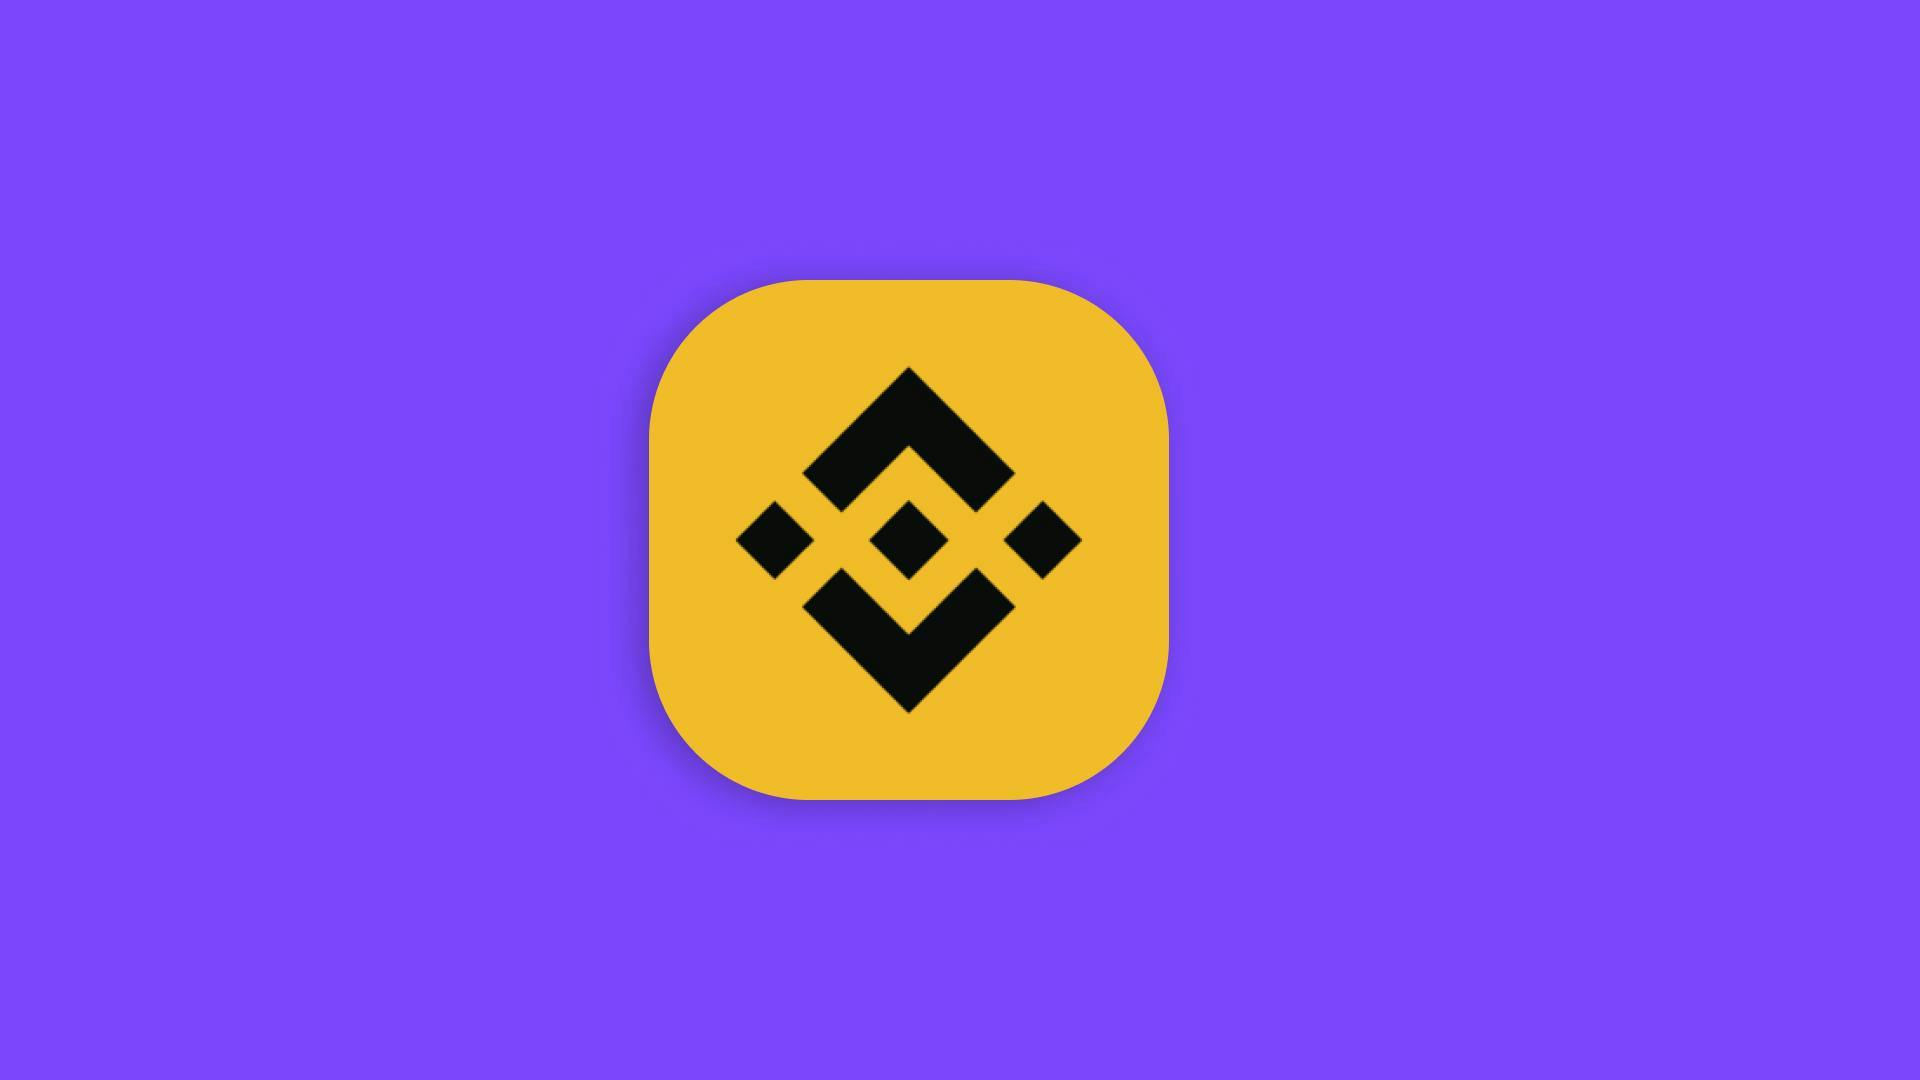 Binance is Looking for Swag Intern